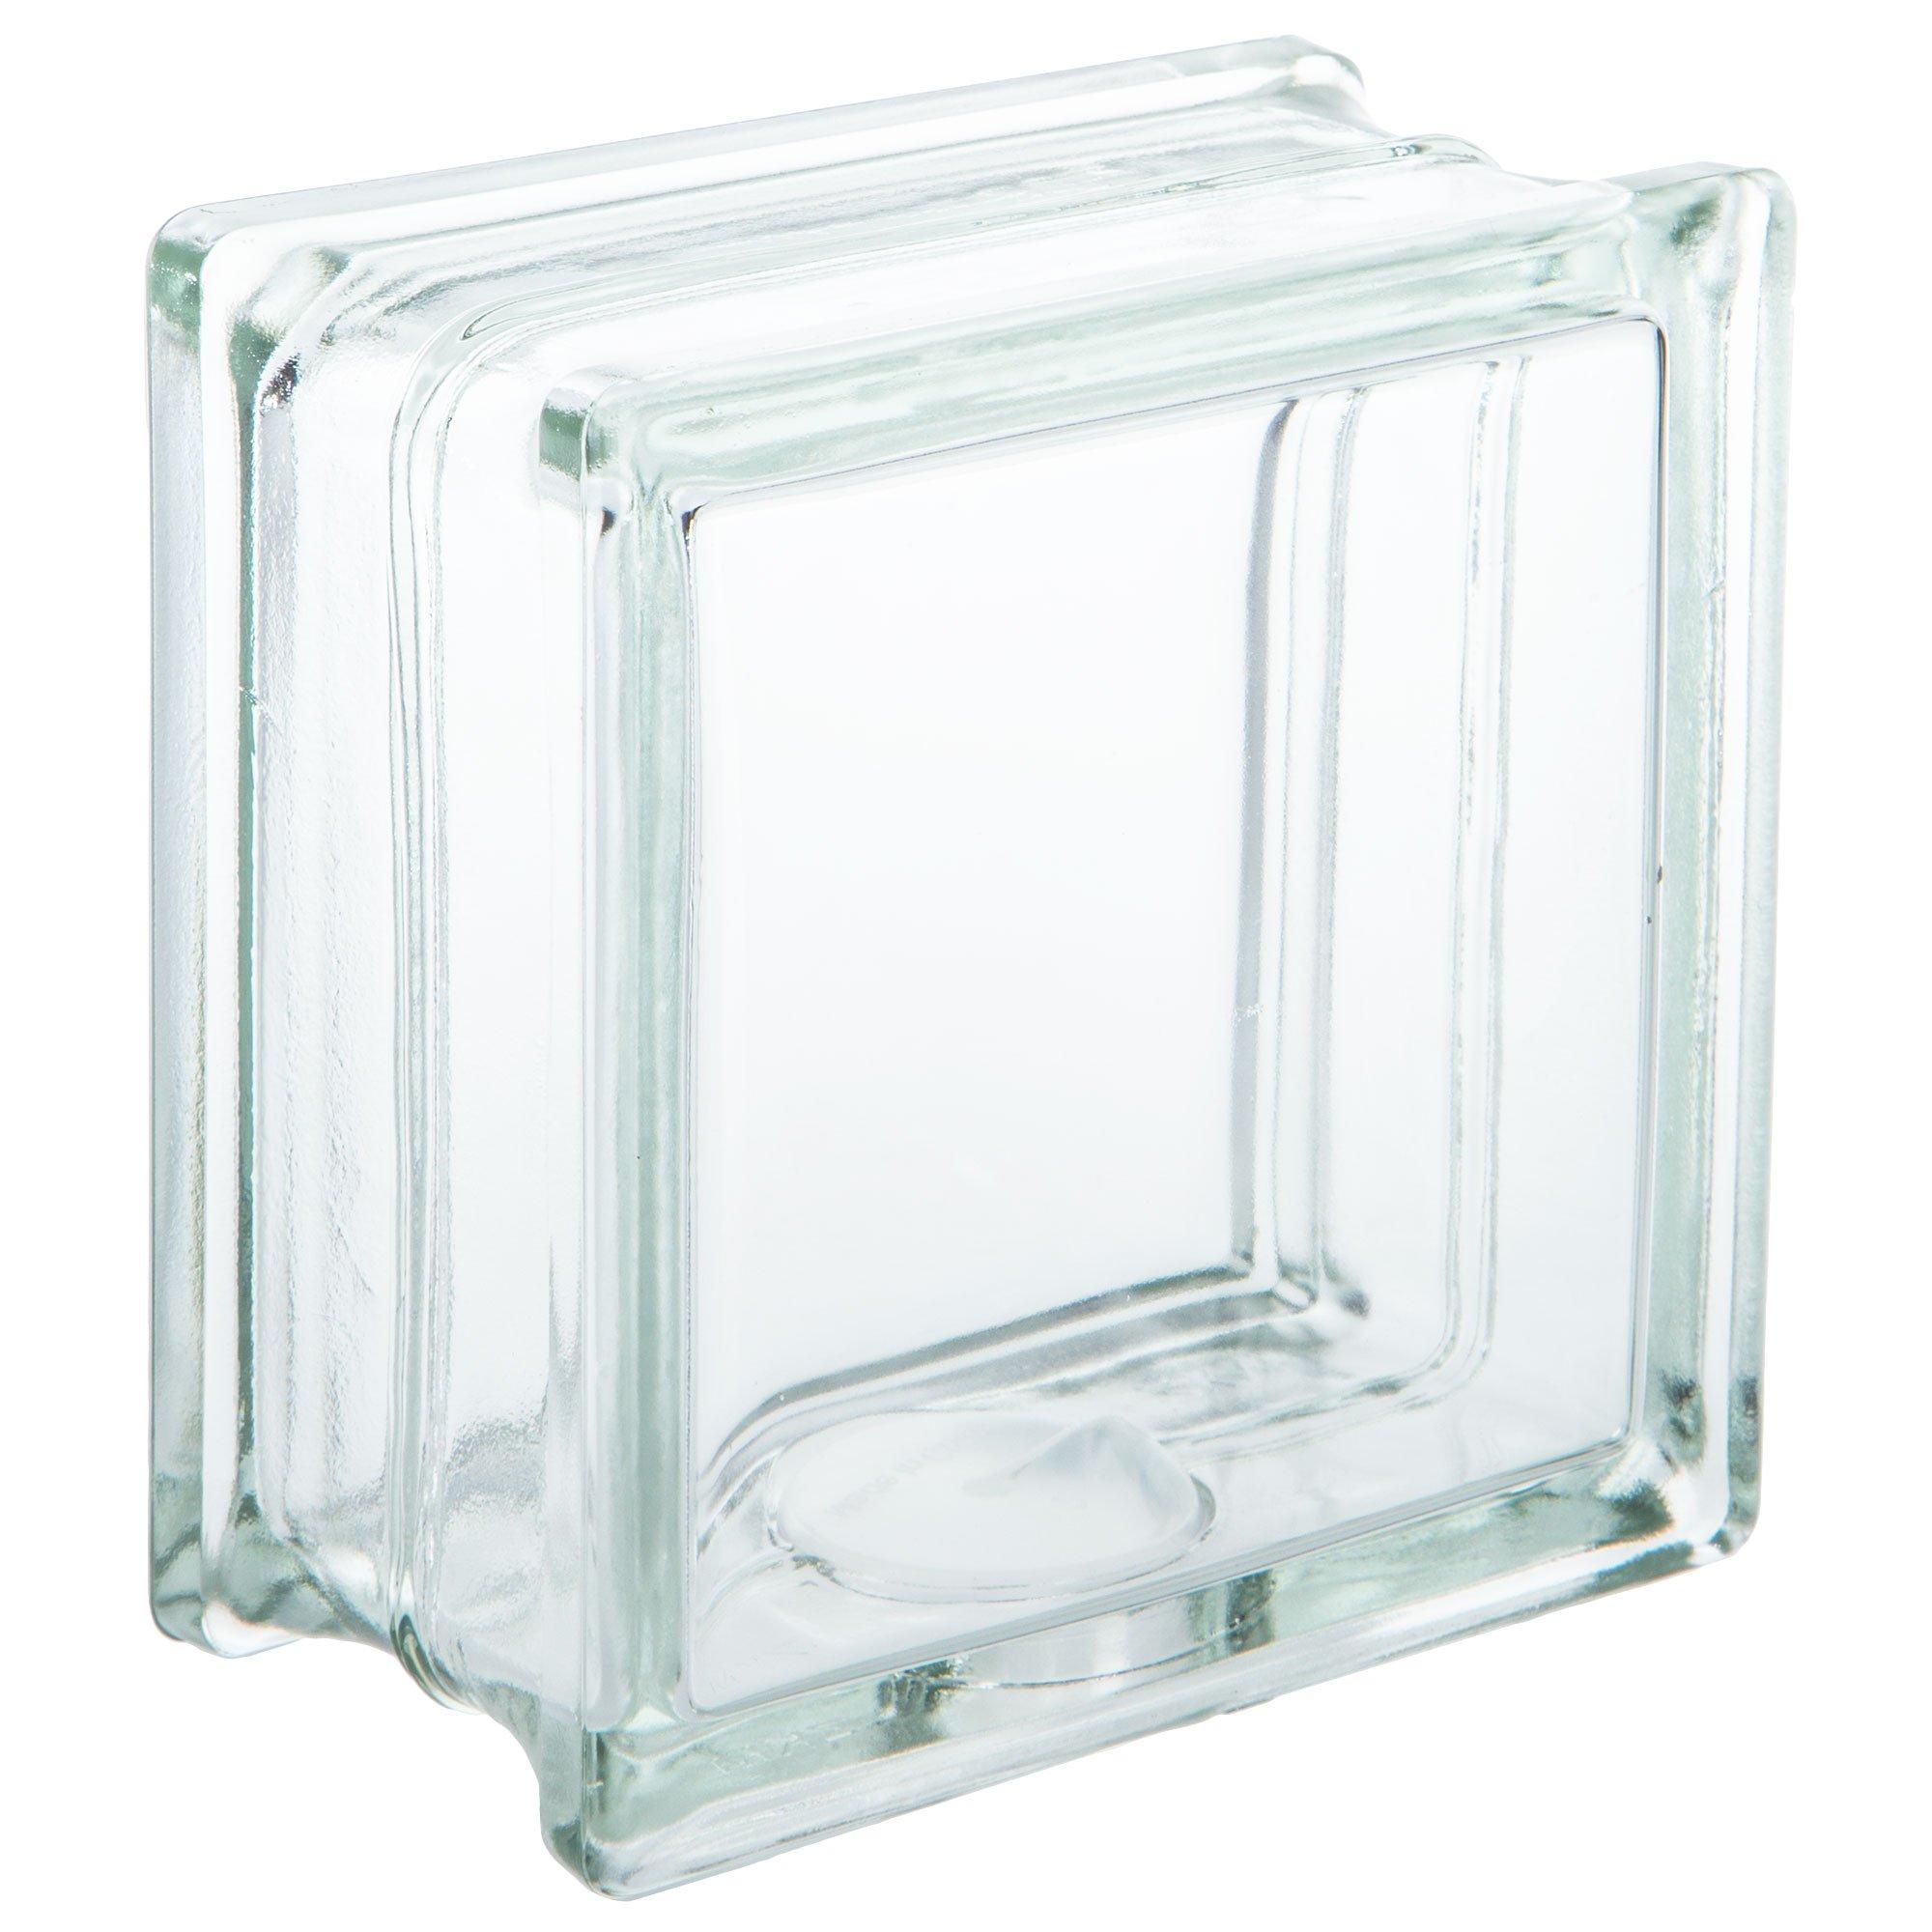 Decorative Glass Block For Crafts